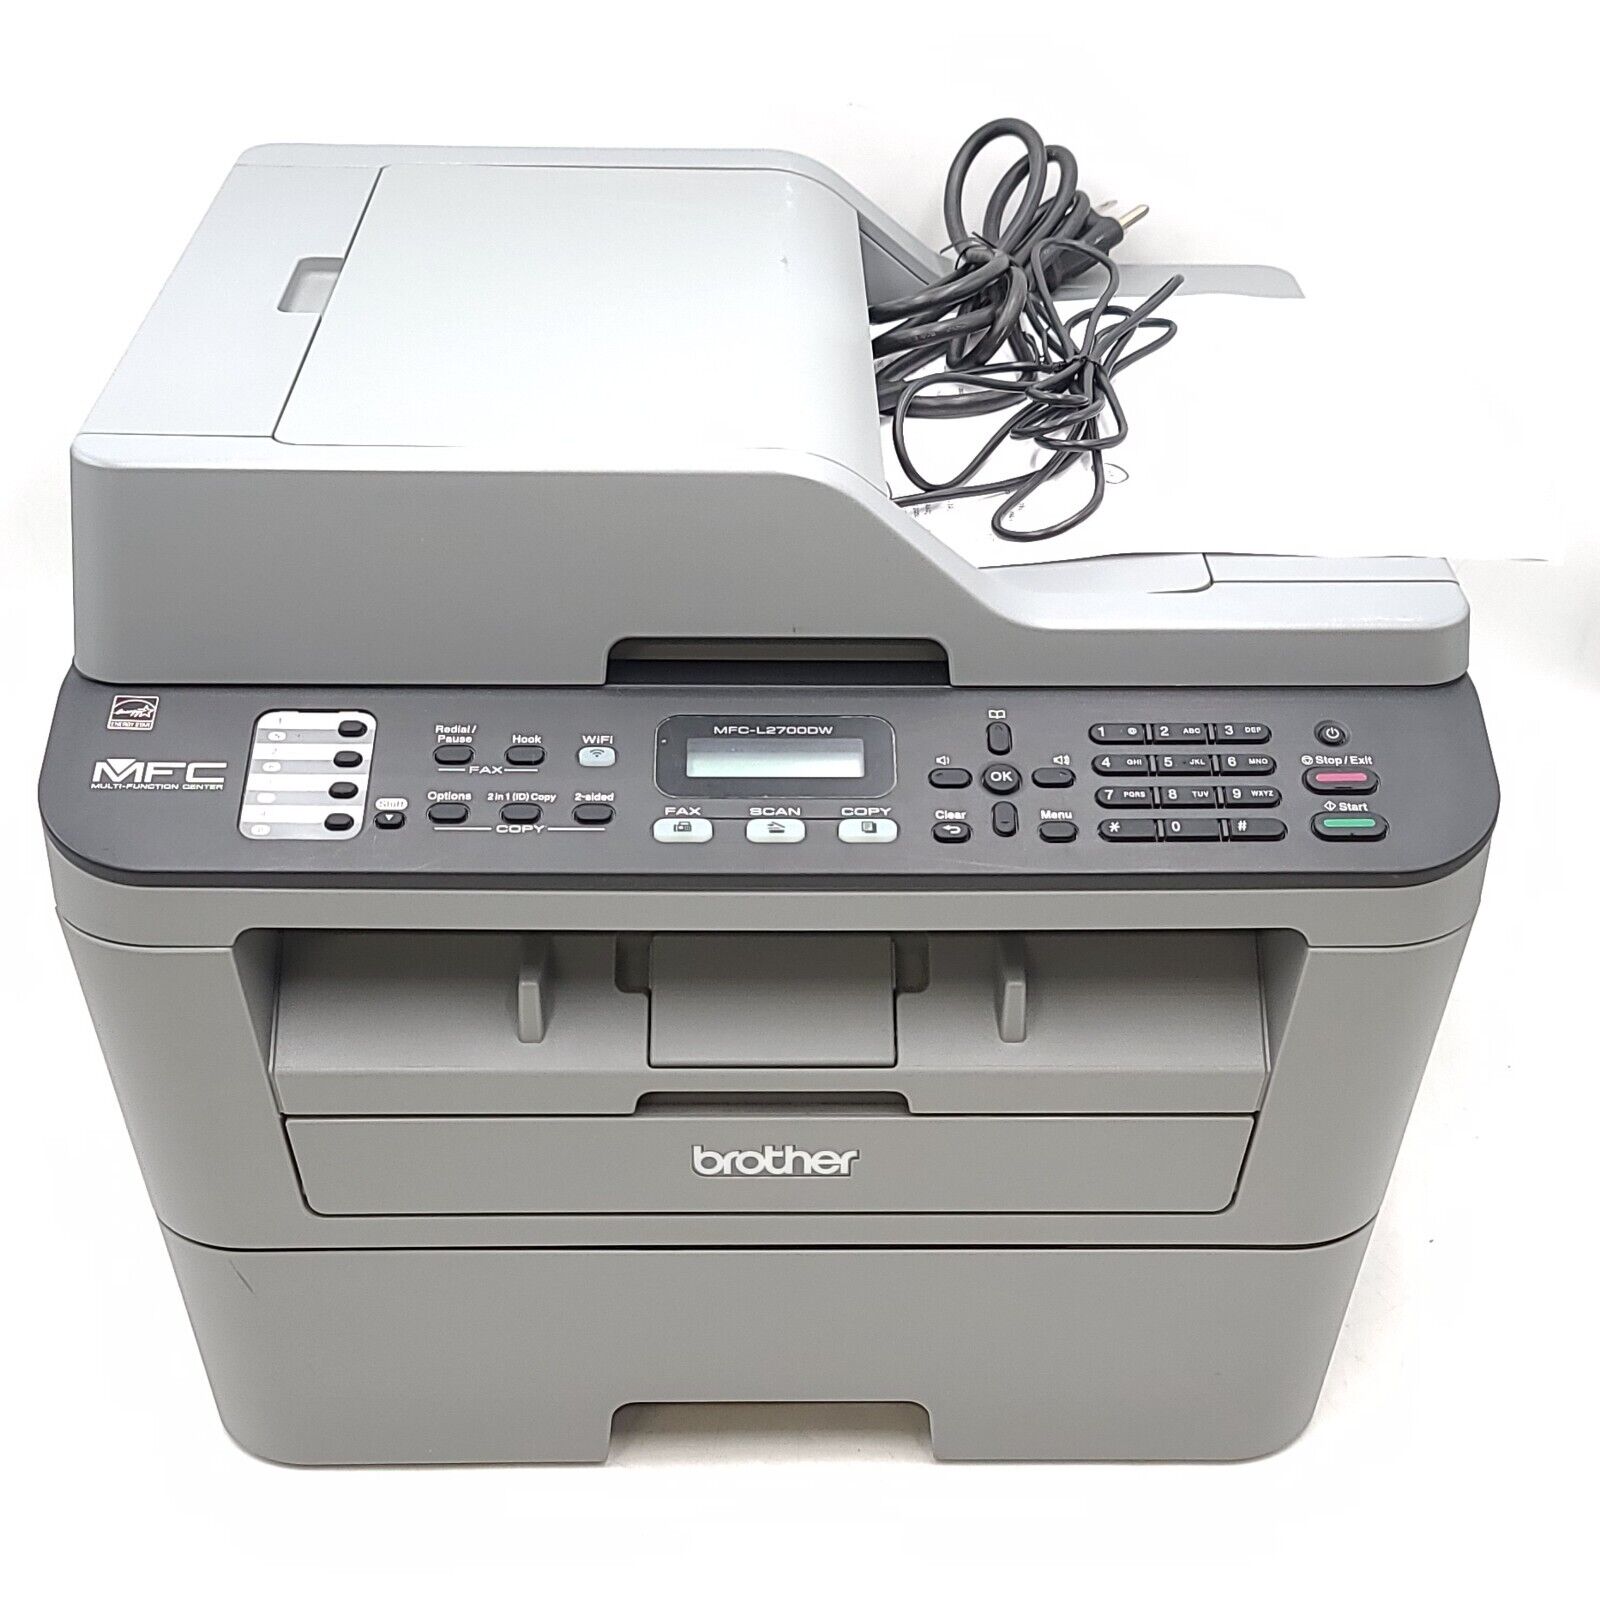 Brother MFC-L2700DW Wireless All-in-One Monochrome Laser Printer Copy Scan